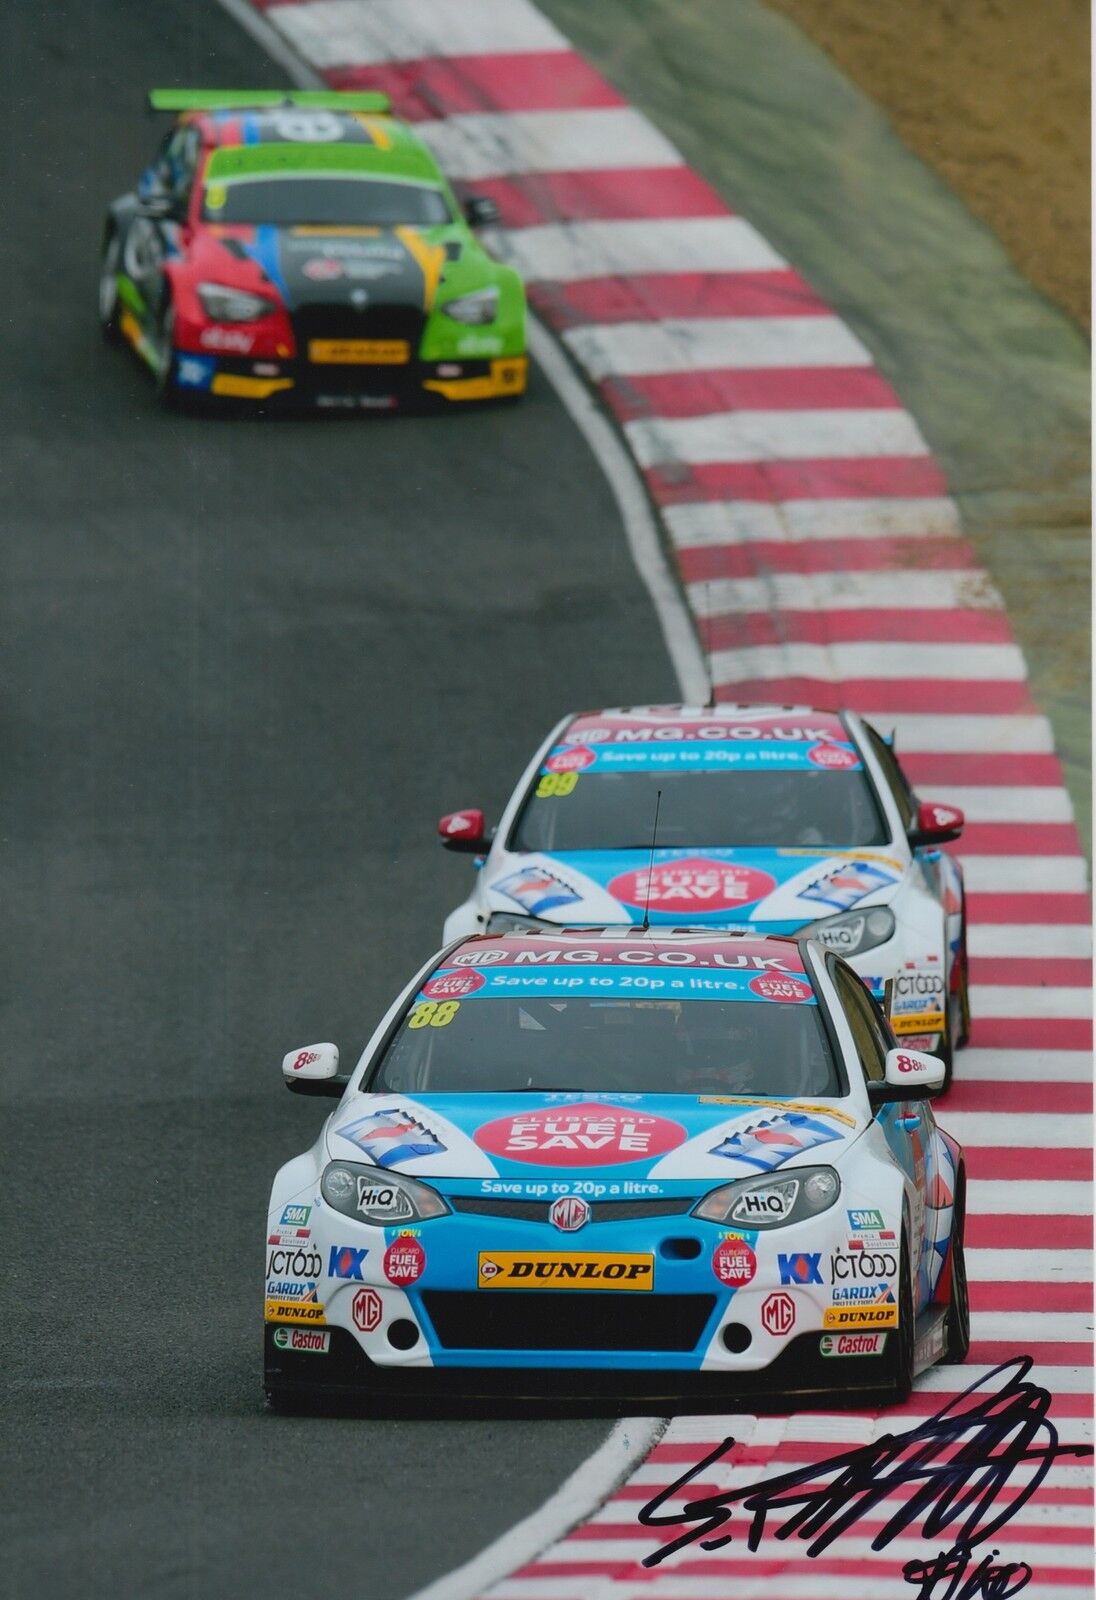 Sam Tordoff Hand Signed 12x8 Photo Poster painting MG 6 GT Touring Cars.